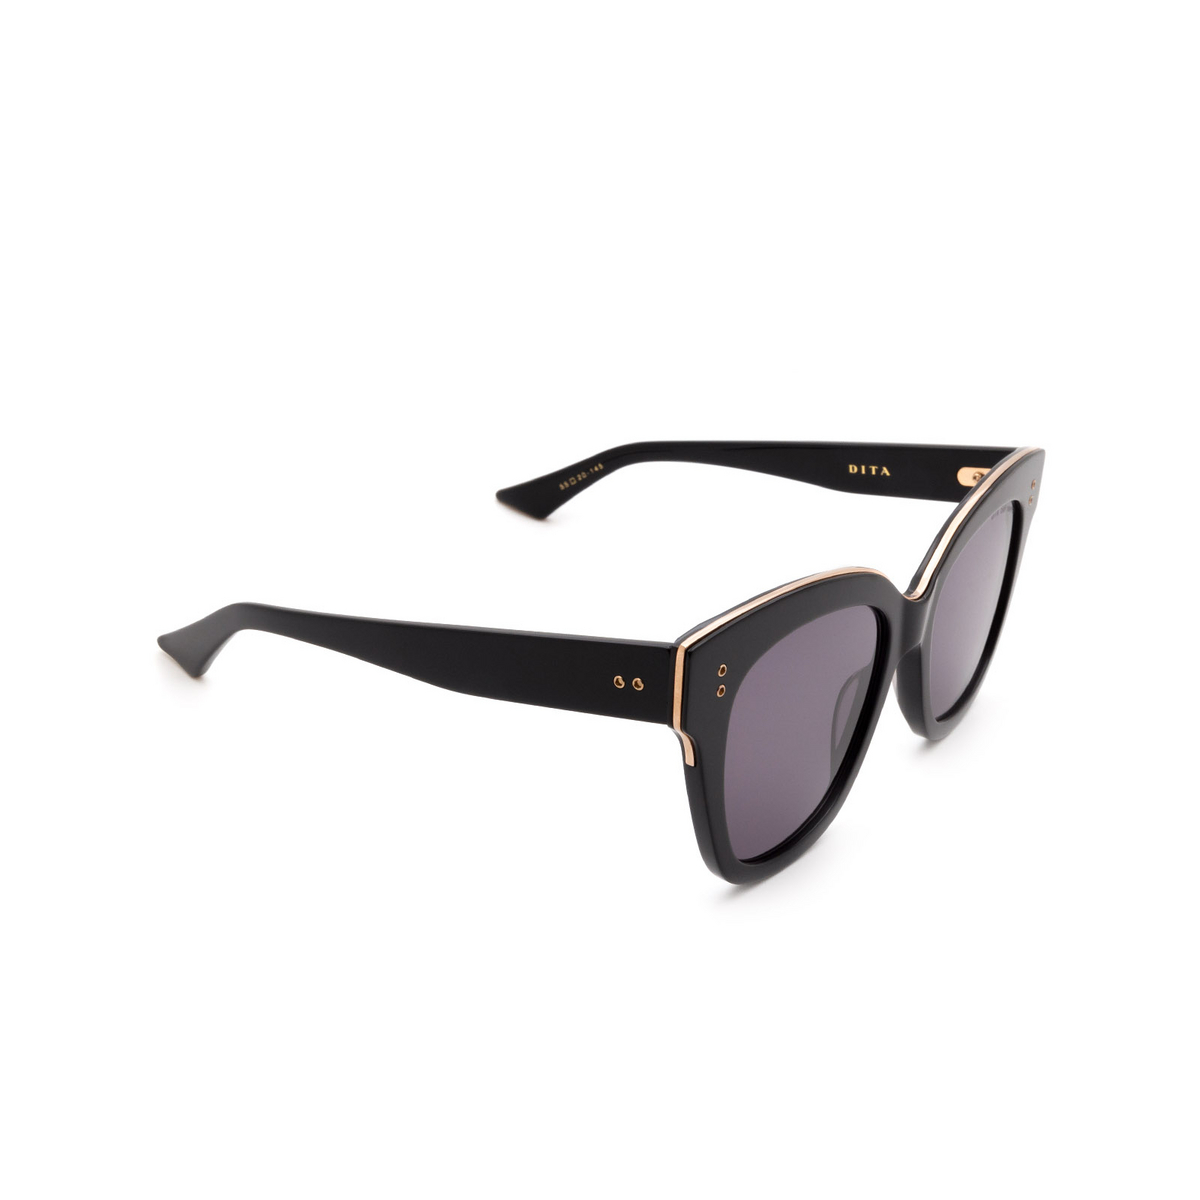 Dita® Butterfly Sunglasses: Day Tripper 22031-E color Black / Rose Gold Blk-rgd - three-quarters view.